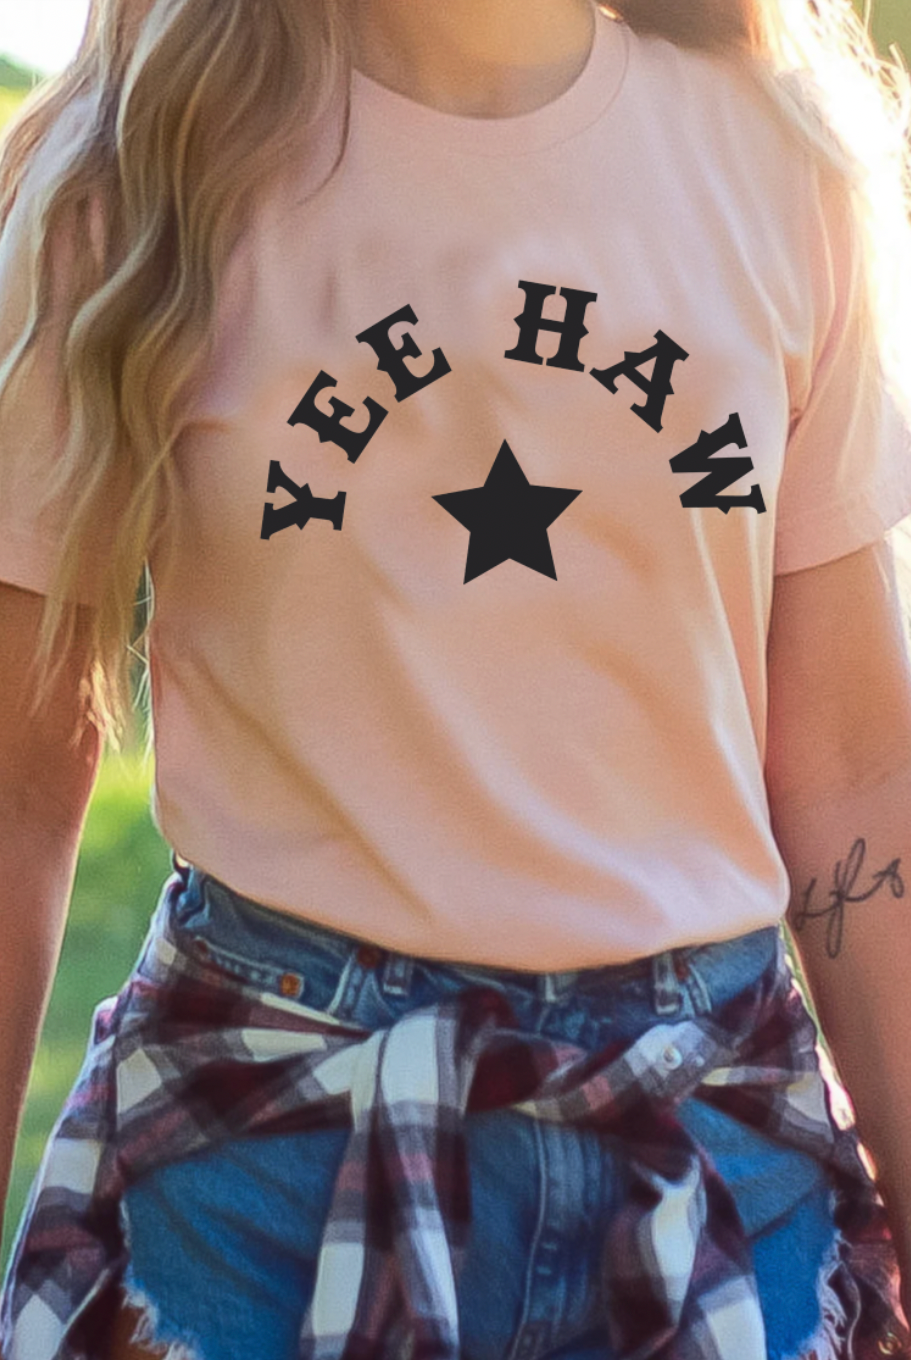 Yee Haw Vintage Country Western Girl Bella and Canvas tshirt. Shipped from Texas. Color is Peach.